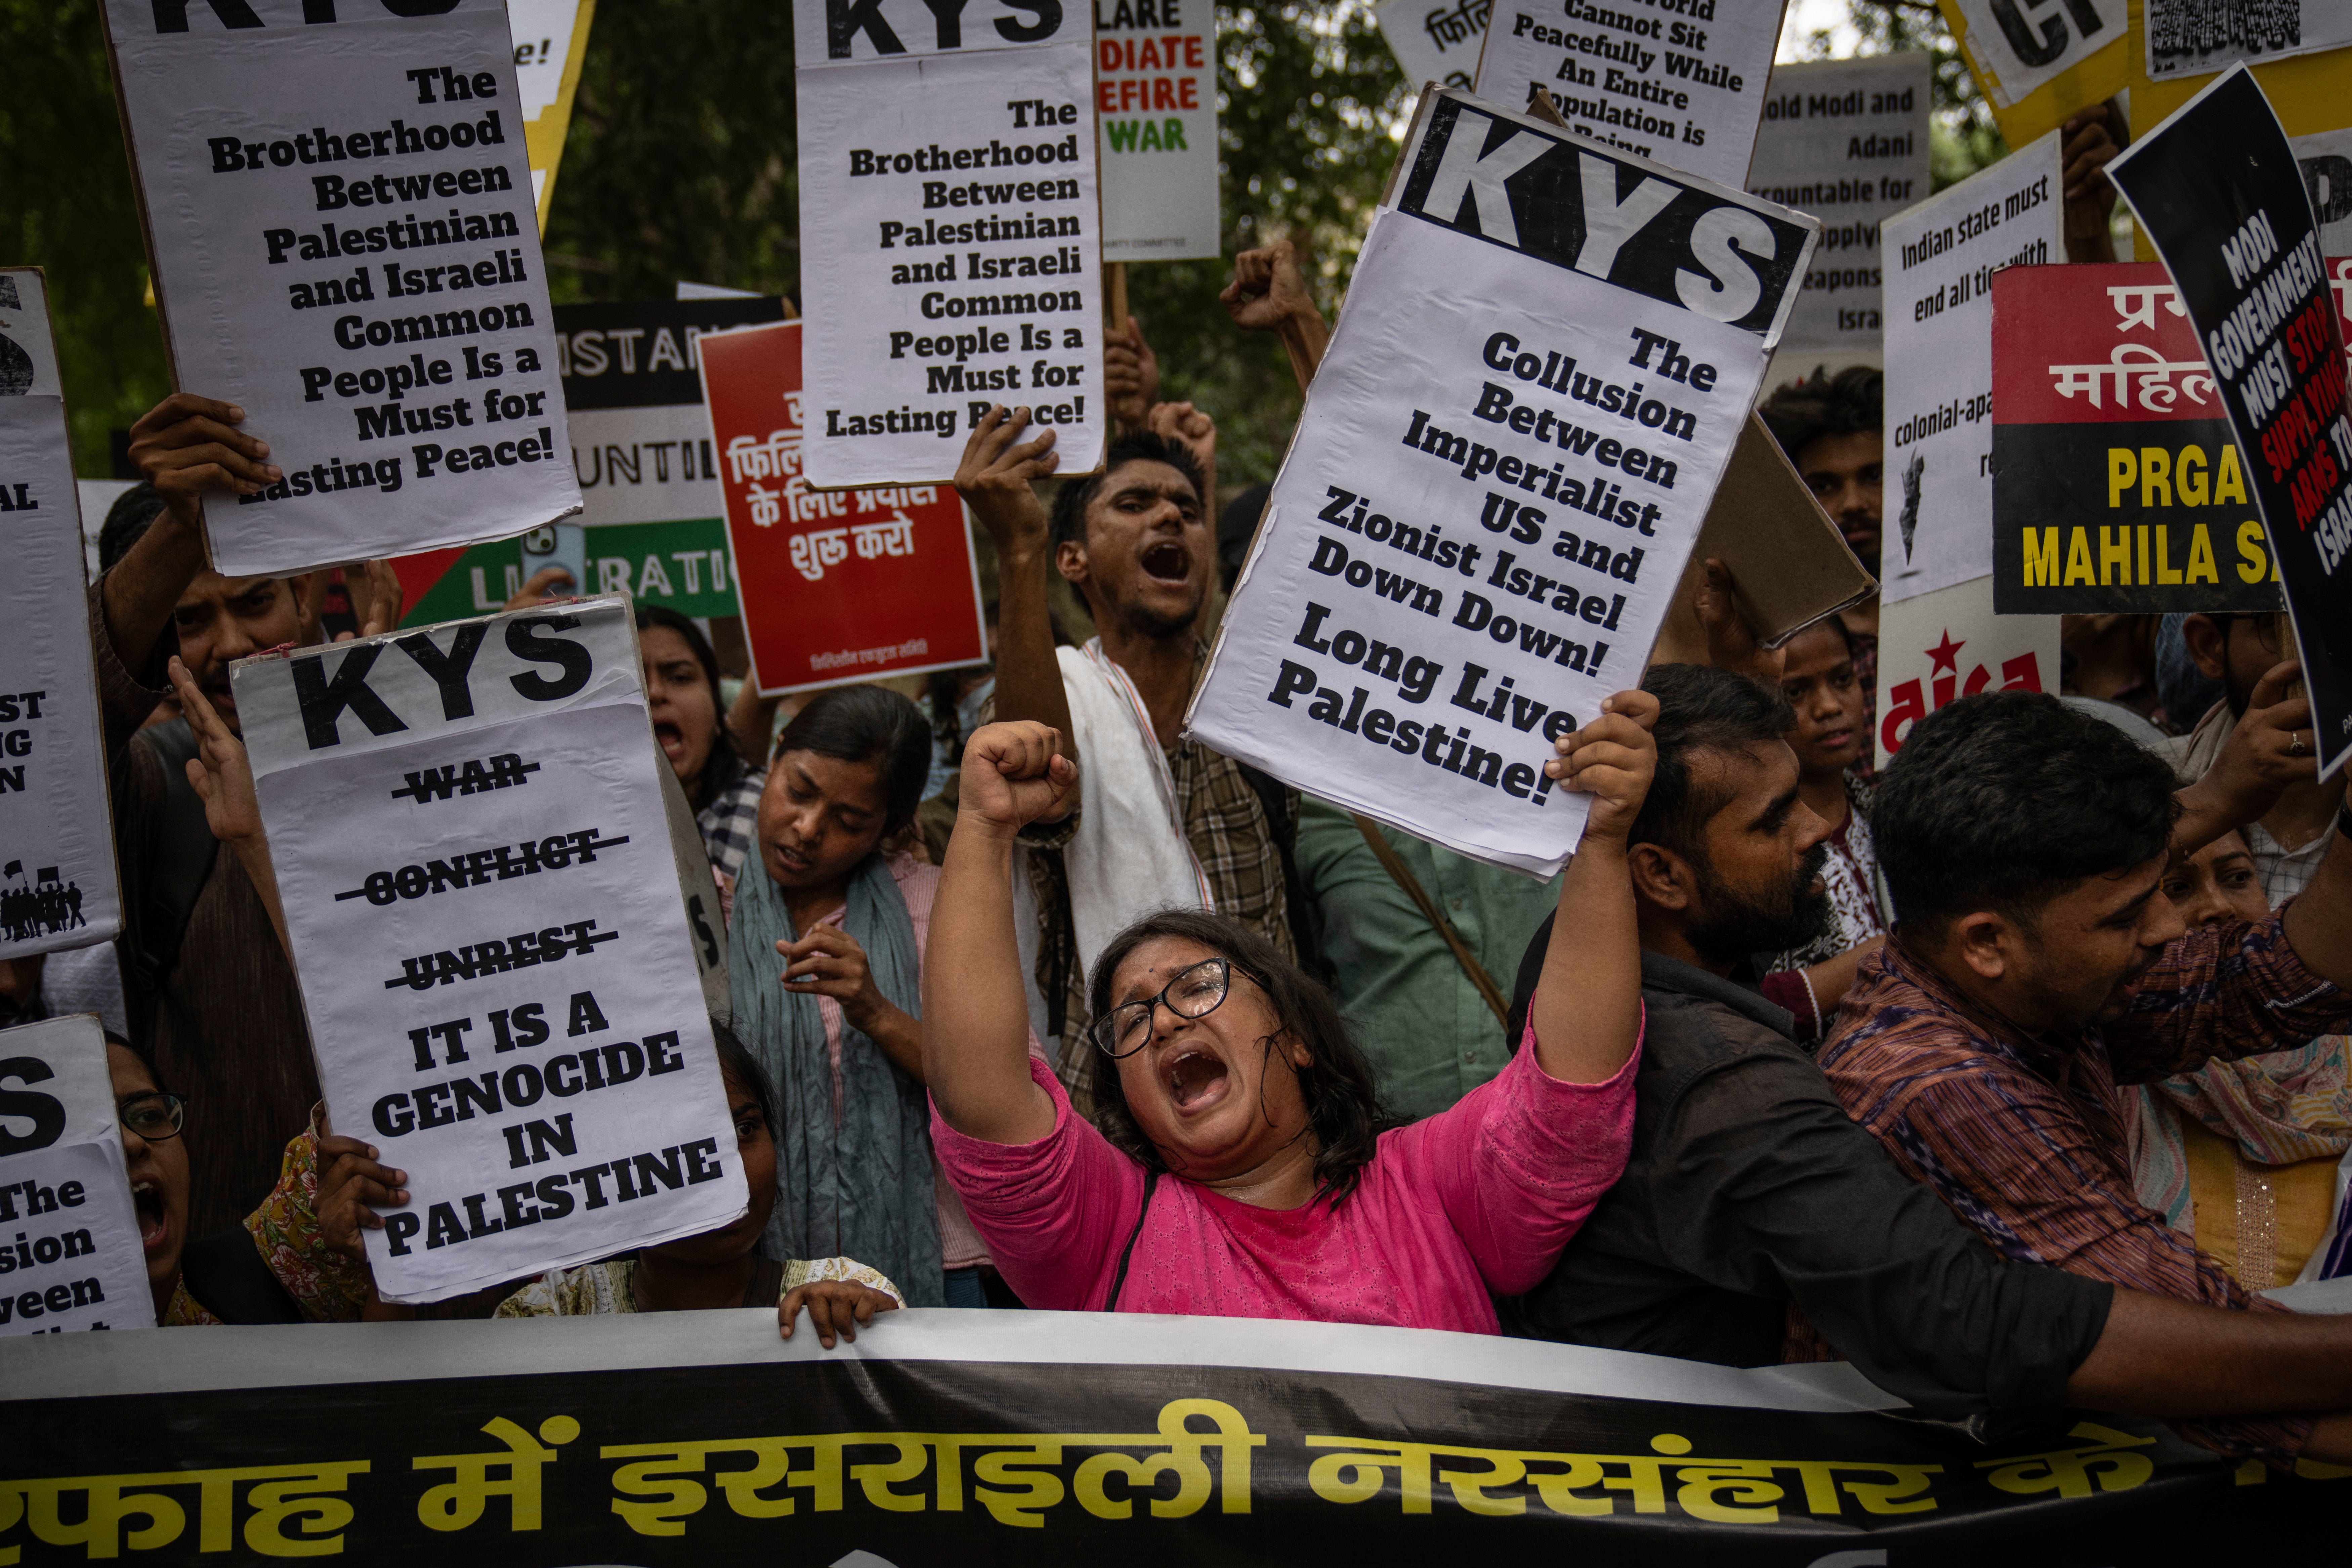 Student activists display placards and shout slogans against the war in Gaza and to show solidarity with the Palestinian people during a protest in New Delhi, India